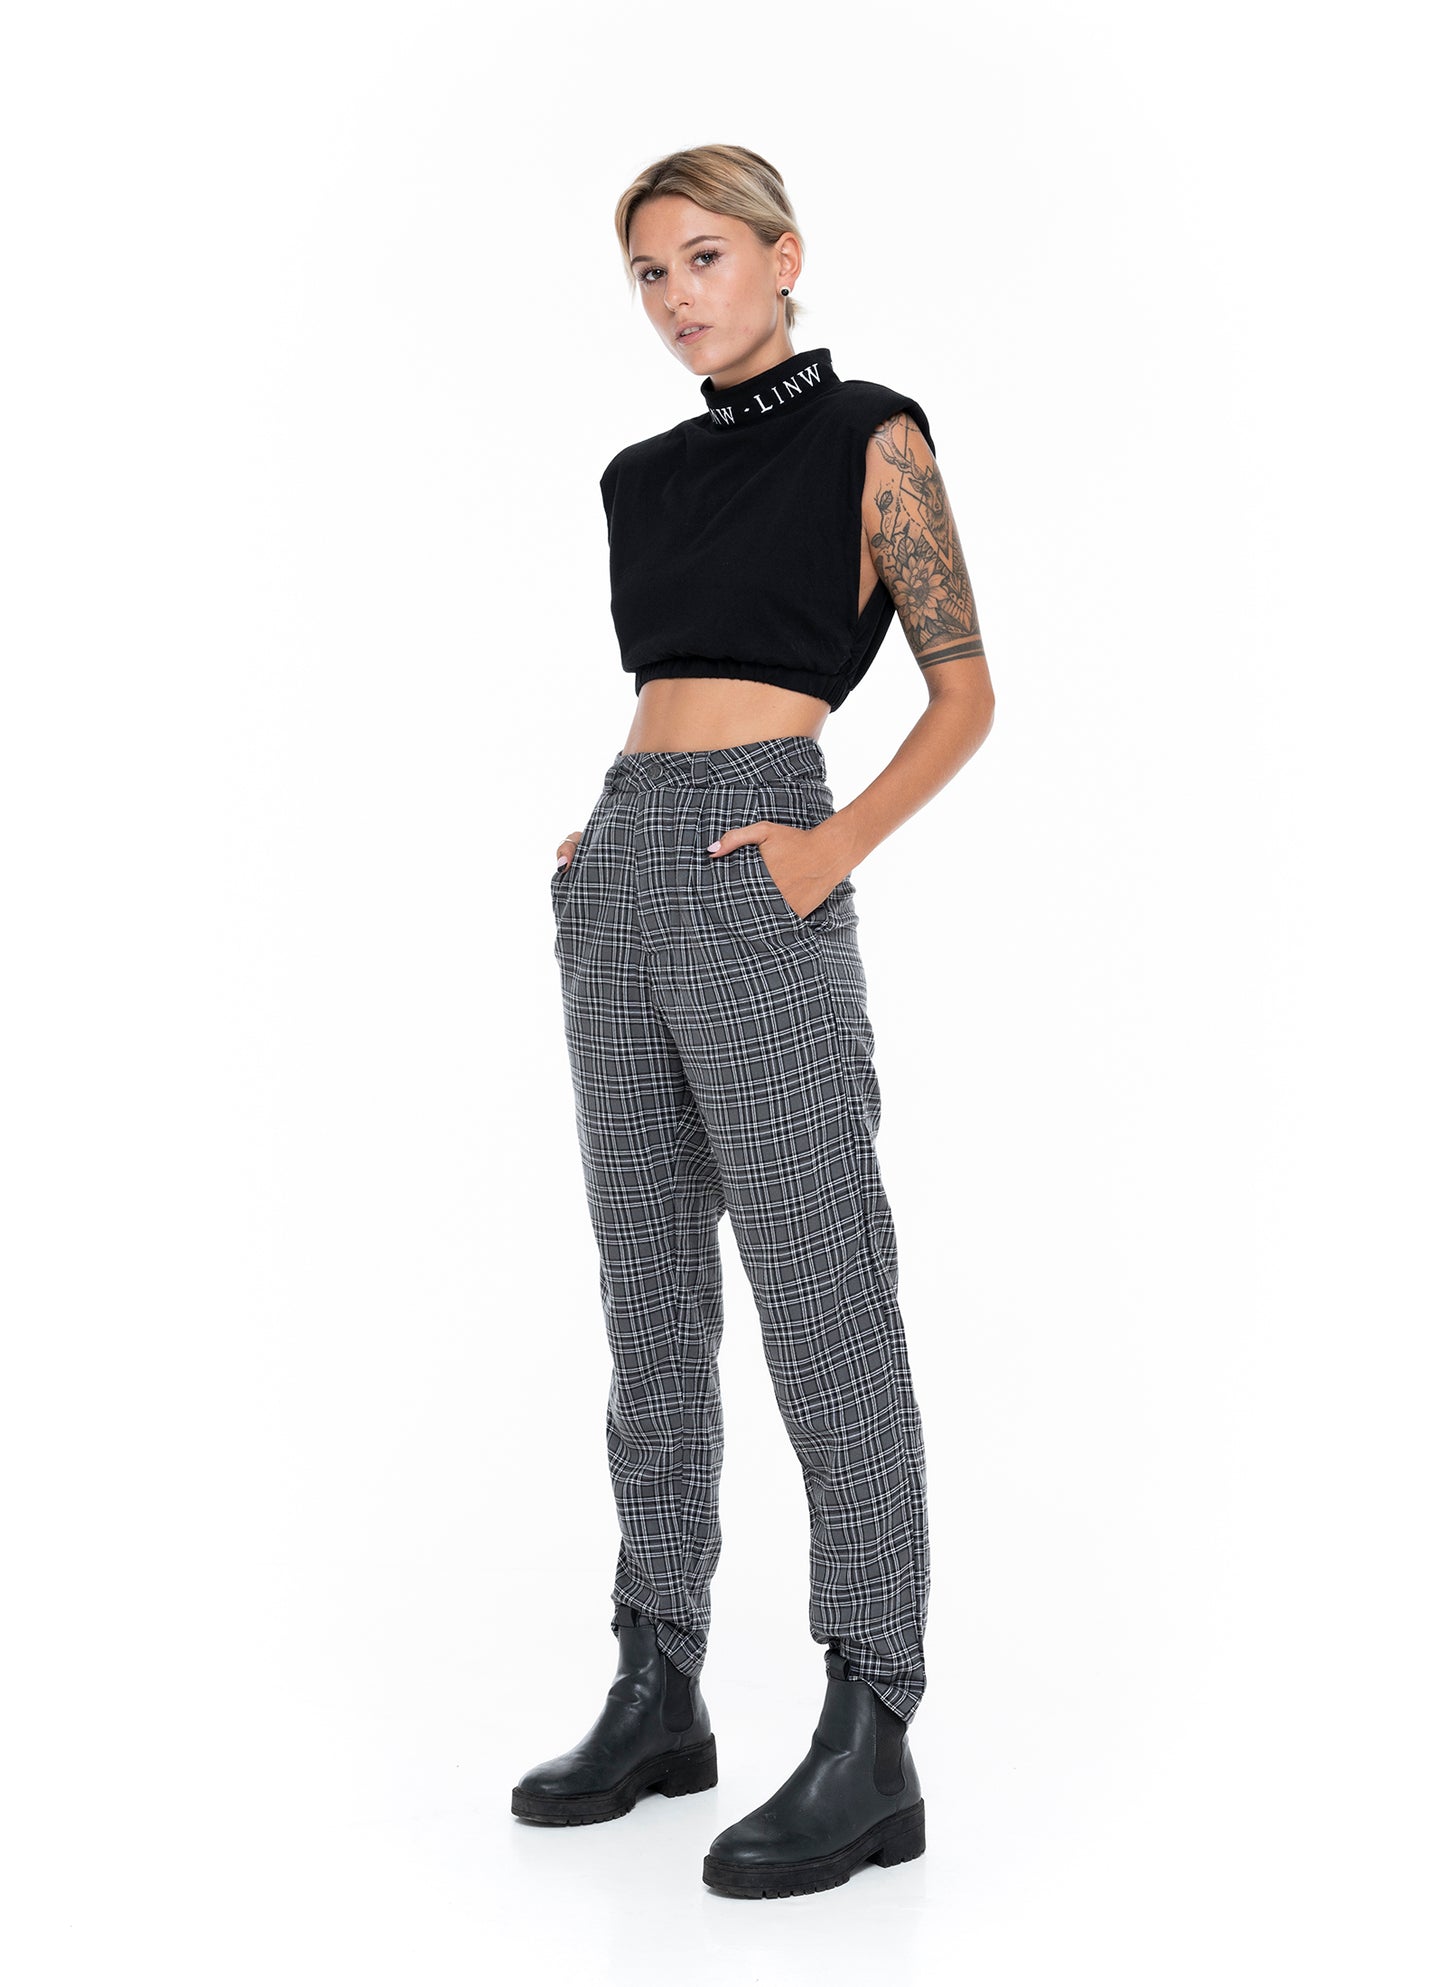 The Rouge Flannel Pant